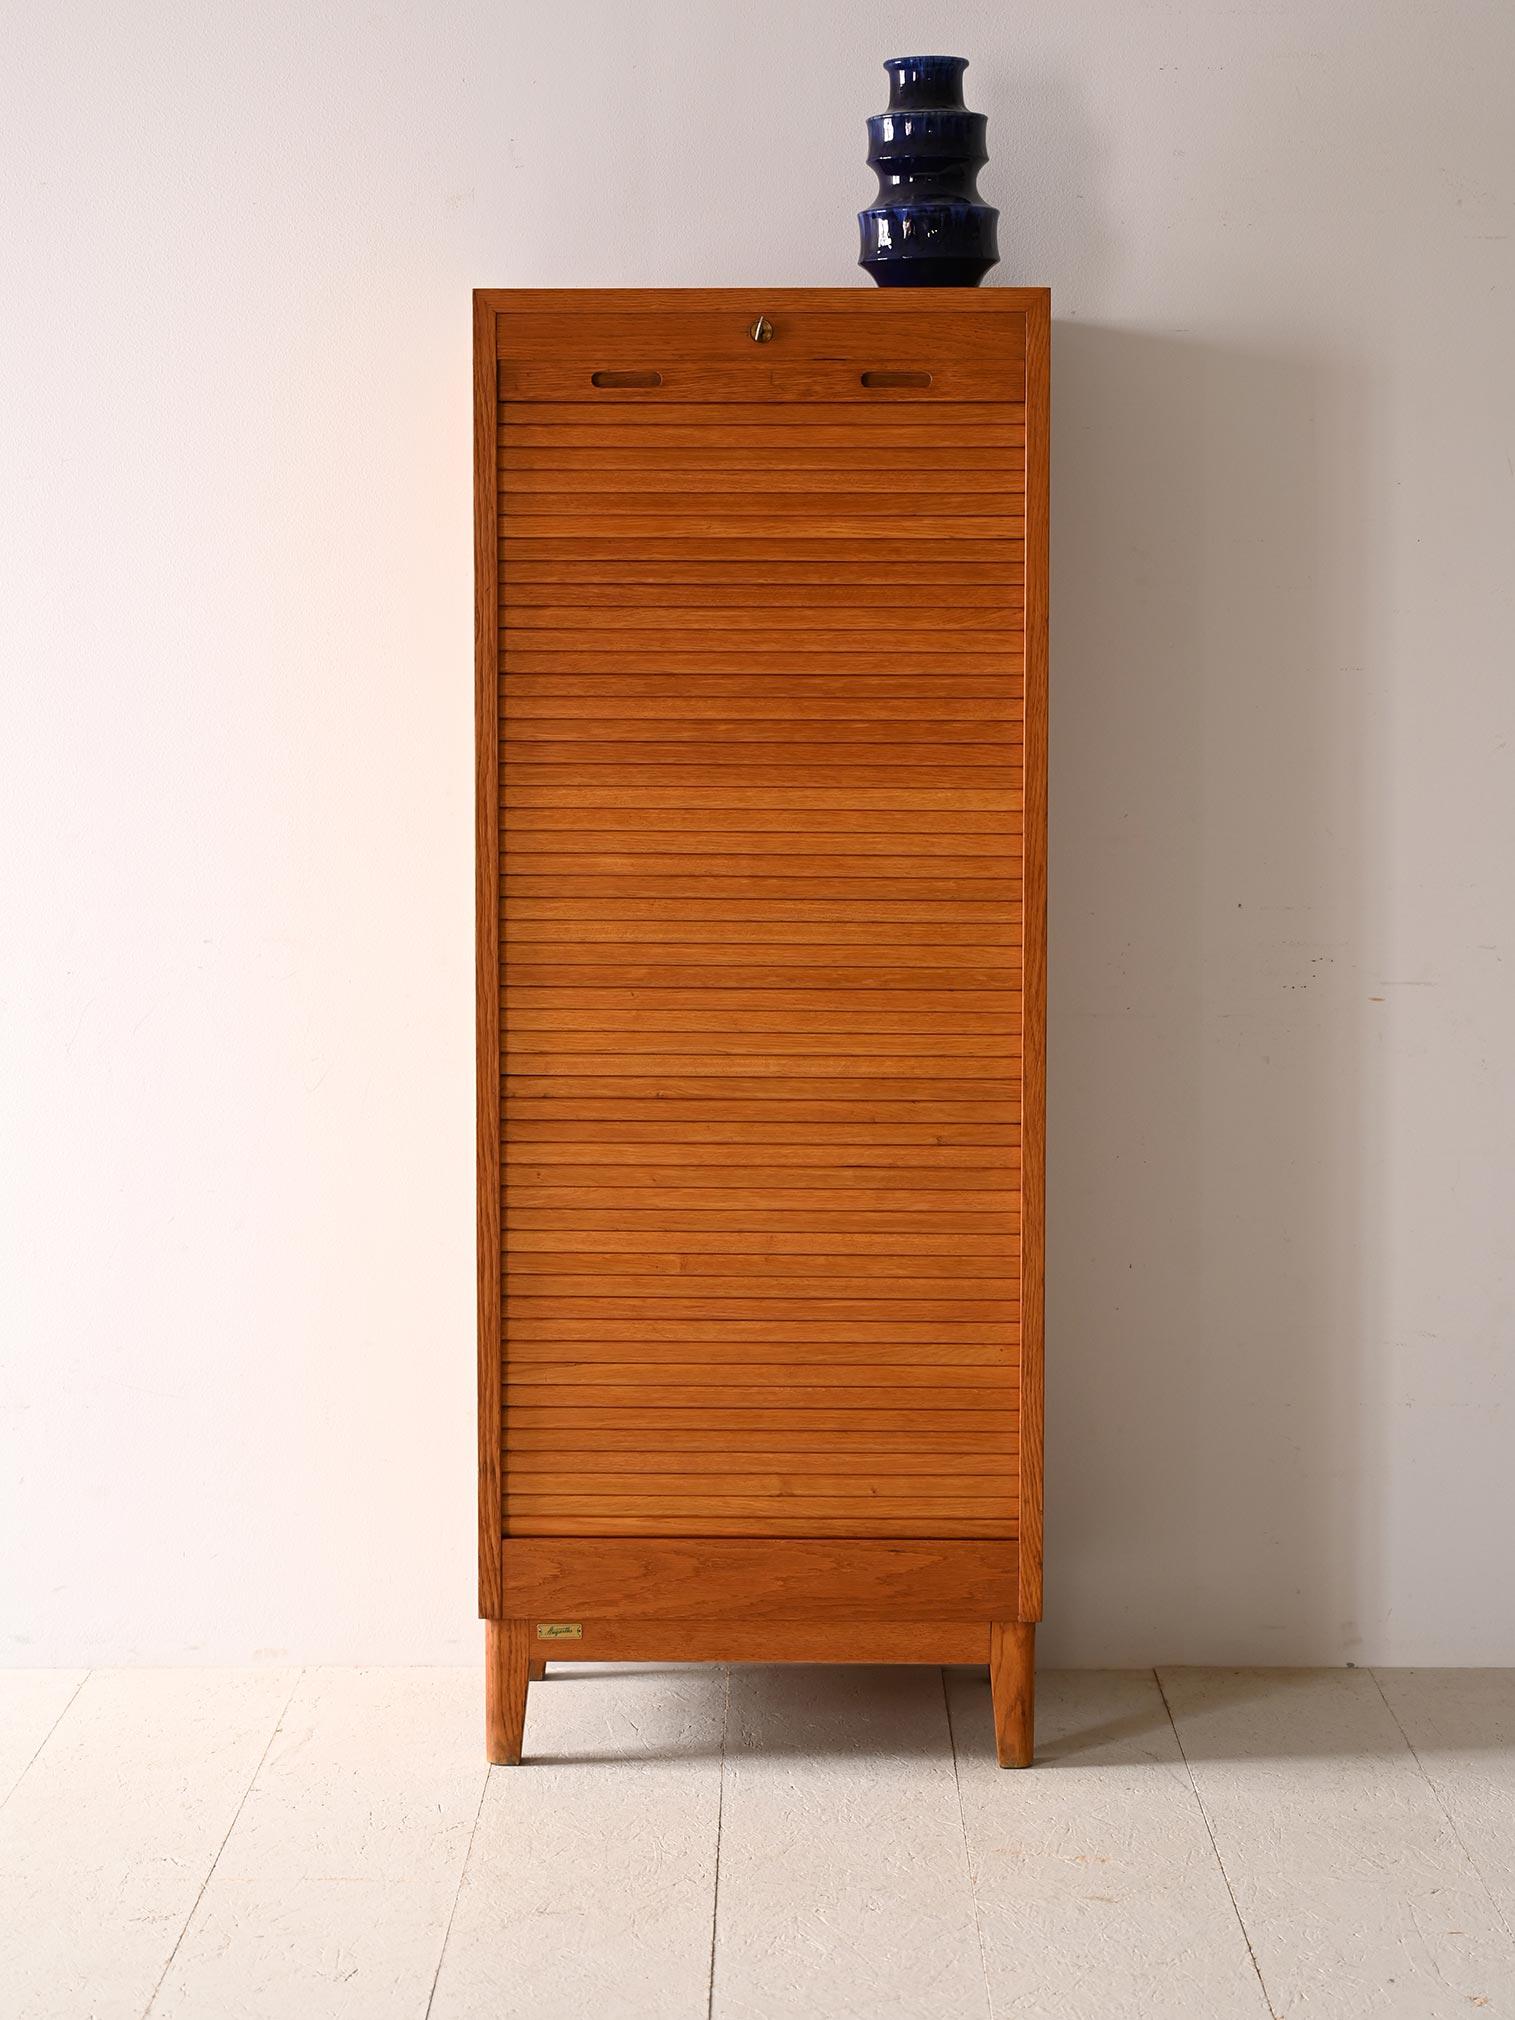 Scandinavian-made rolling shutter file cabinet.

This piece of Nordic modernism traces mid-century taste and style with clean, modern lines and refined details.
The light oak wood frame is suitable for inclusion in different types of environments